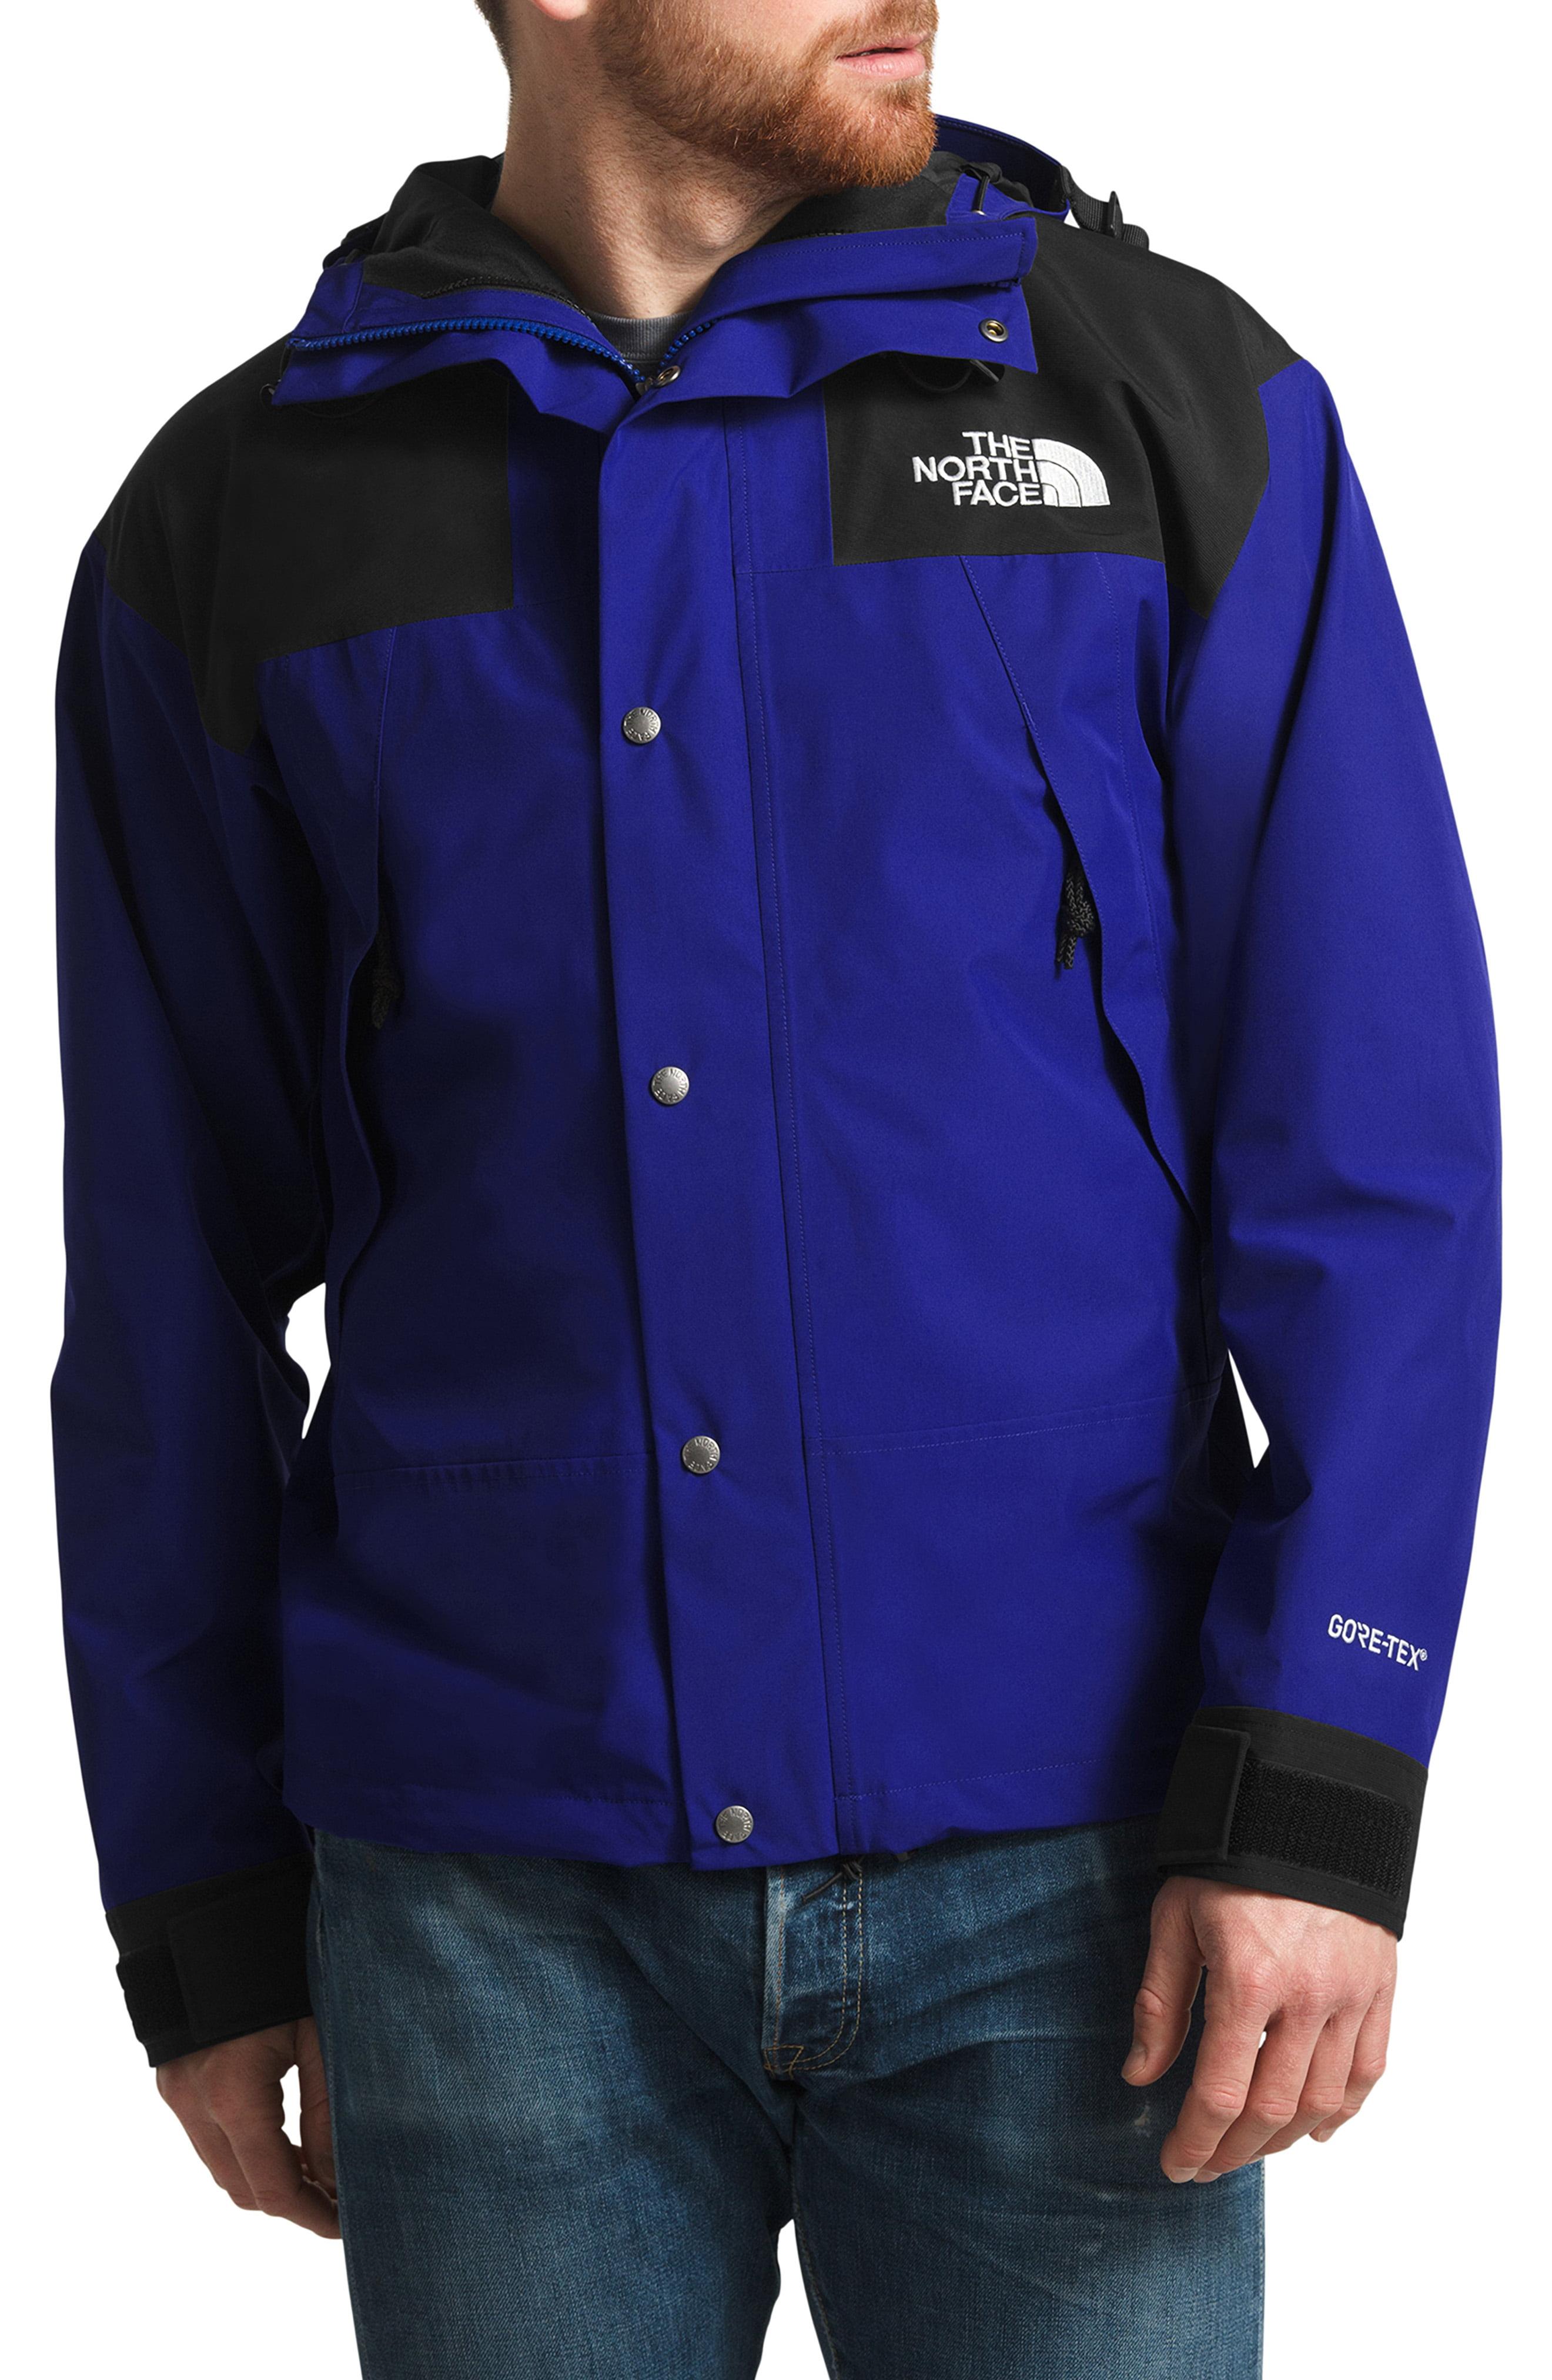 Lyst - The North Face 1990 Mountain Gtx Weatherproof Jacket in Blue for Men